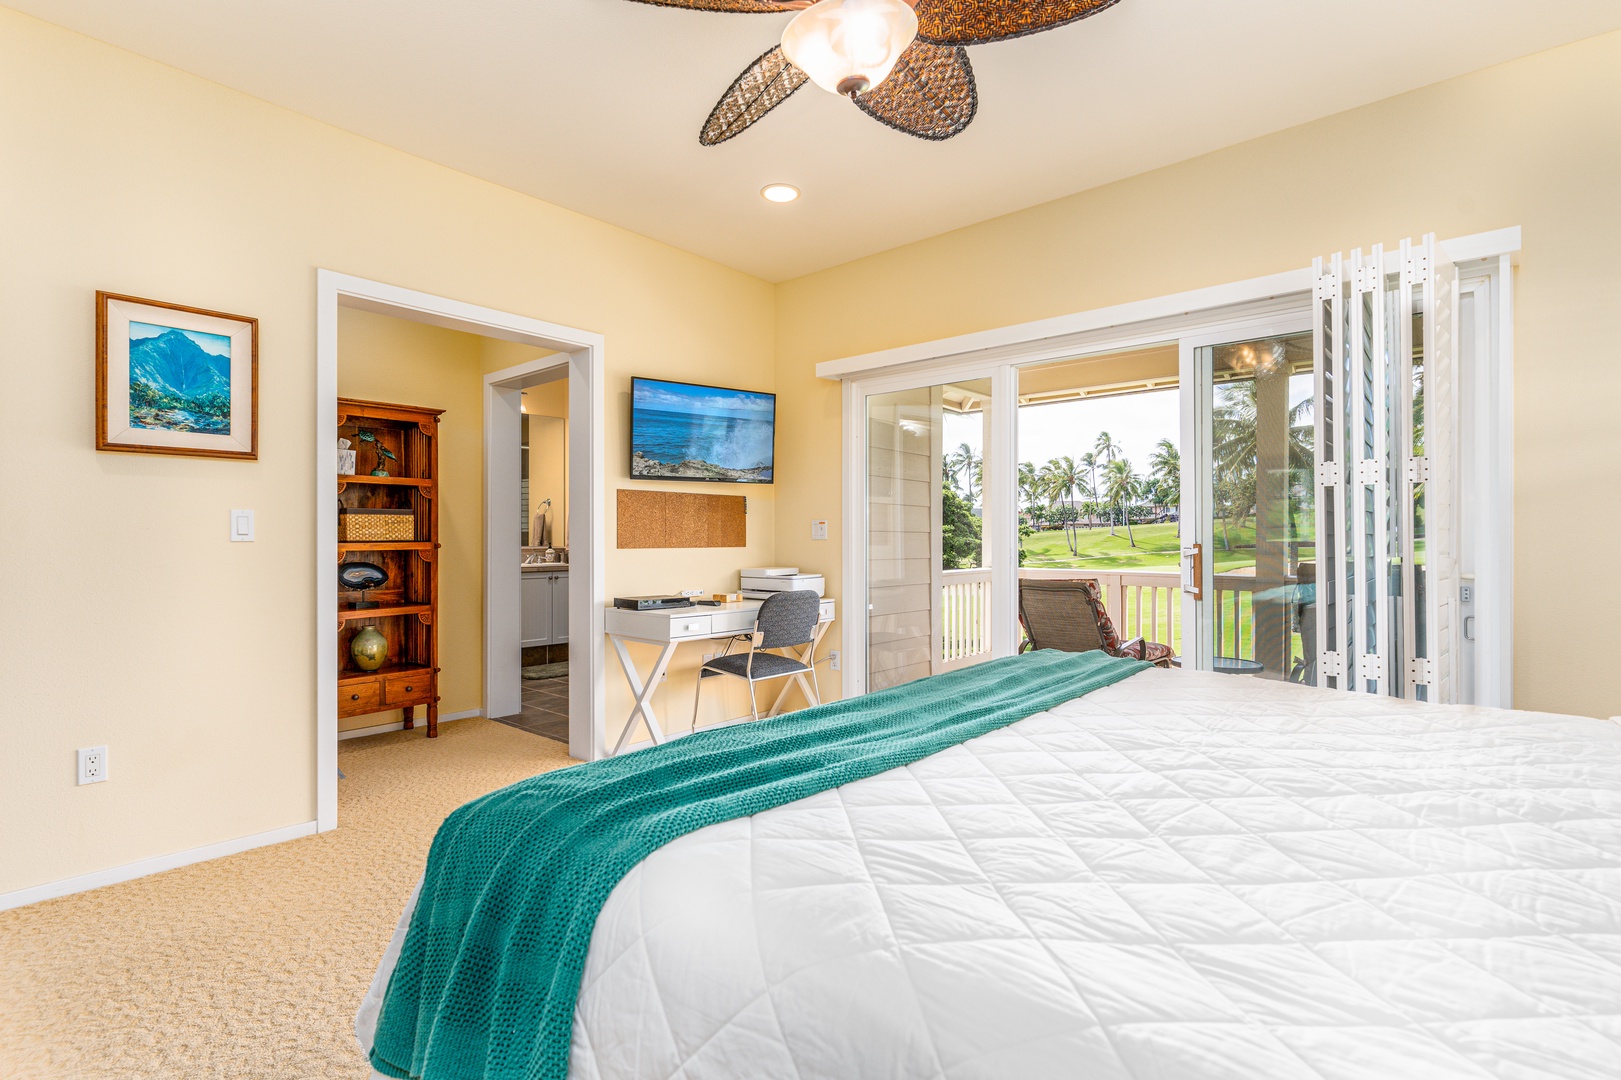 Kapolei Vacation Rentals, Coconut Plantation 1100-2 - The primary guest bedroom upstairs with TV and access to the lanai.